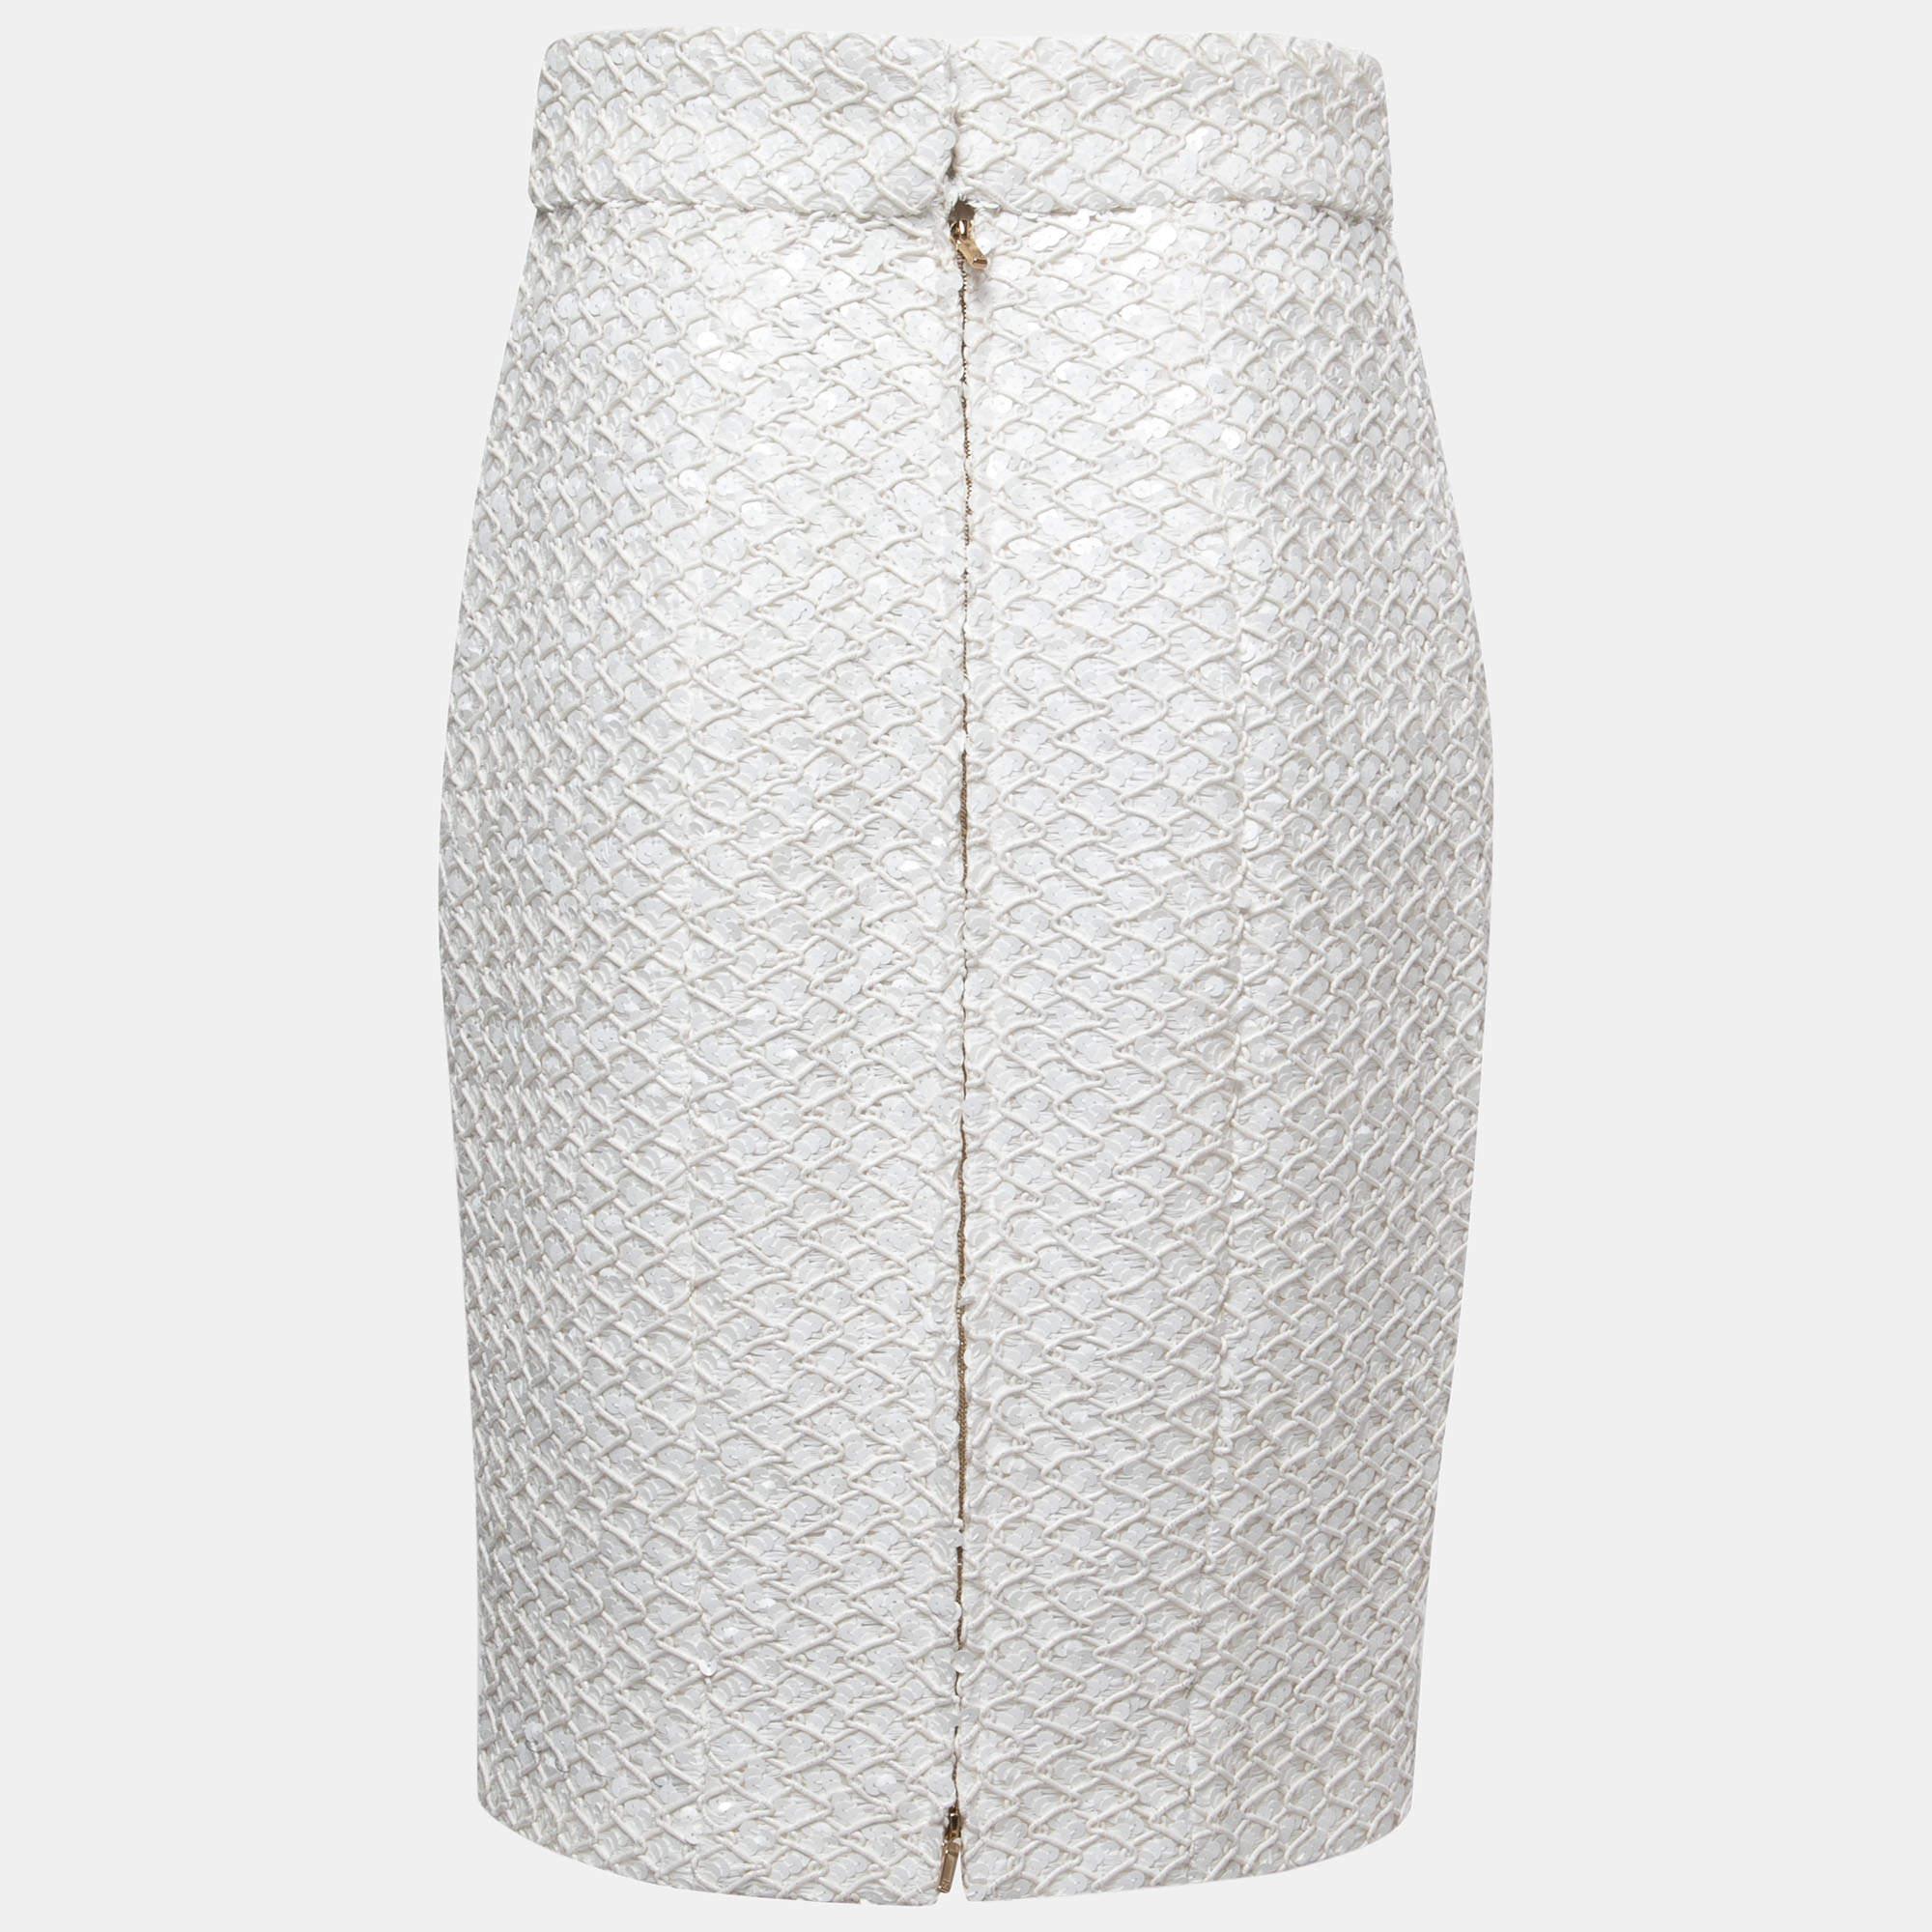 The Chanel skirt is a glamorous fashion piece. It features a form-fitting silhouette, adorned with delicate white sequins, which catch and reflect light beautifully. This skirt exudes sophistication and is perfect for formal events or a chic night